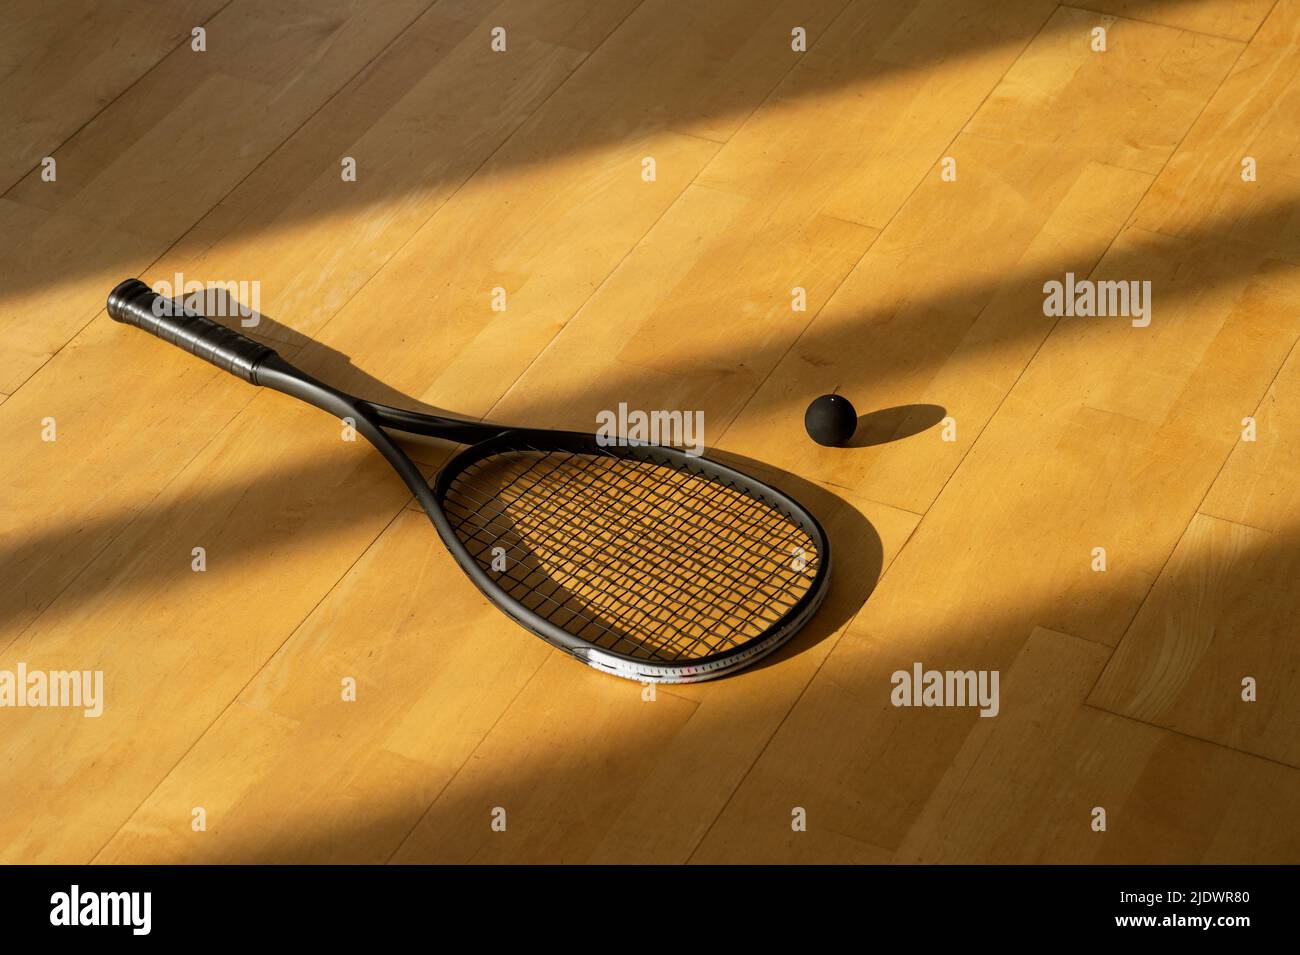 Black squash racket and ball with natural lighting on grey court. Horizontal sport theme poster, greeting cards, headers, website and app Stock Photo